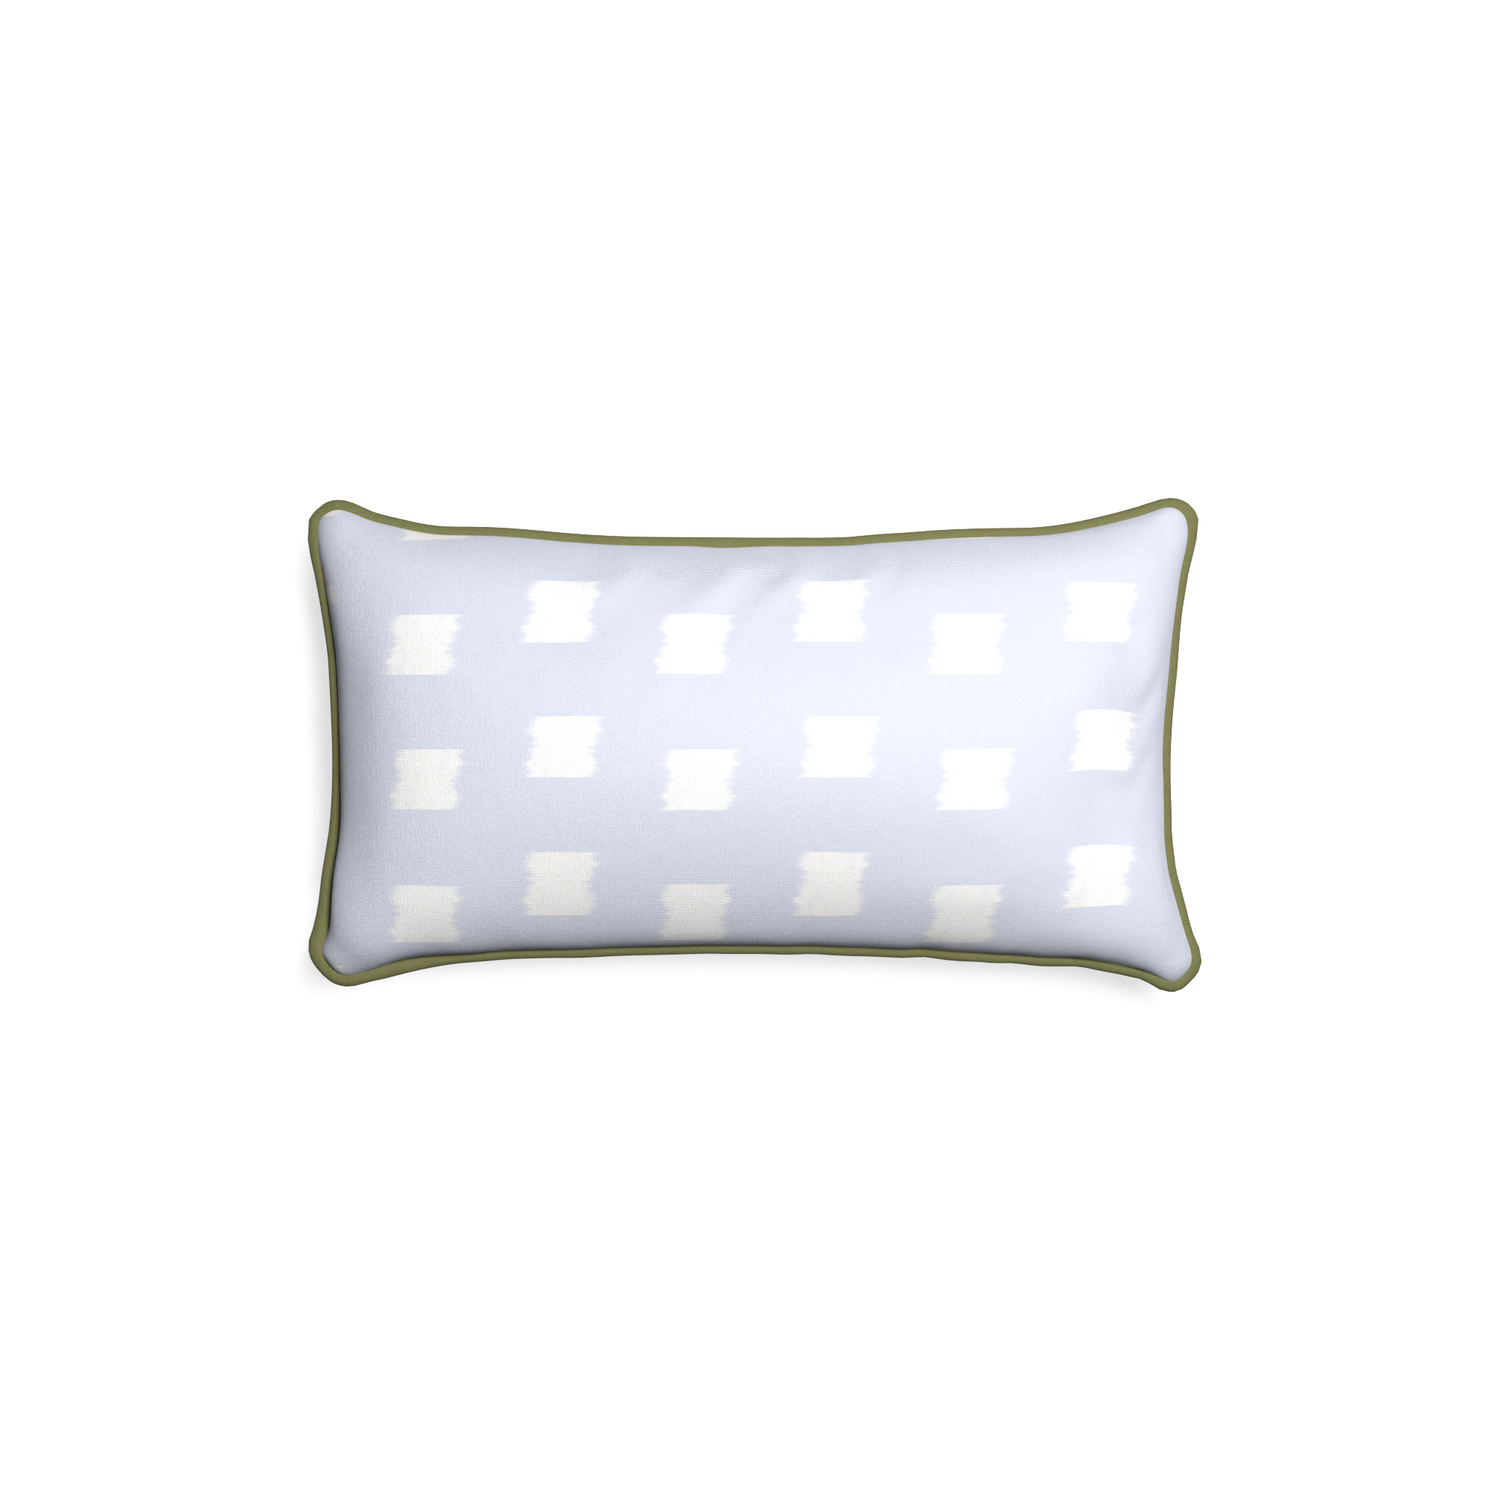 Petite-lumbar denton custom sky blue patternpillow with moss piping on white background